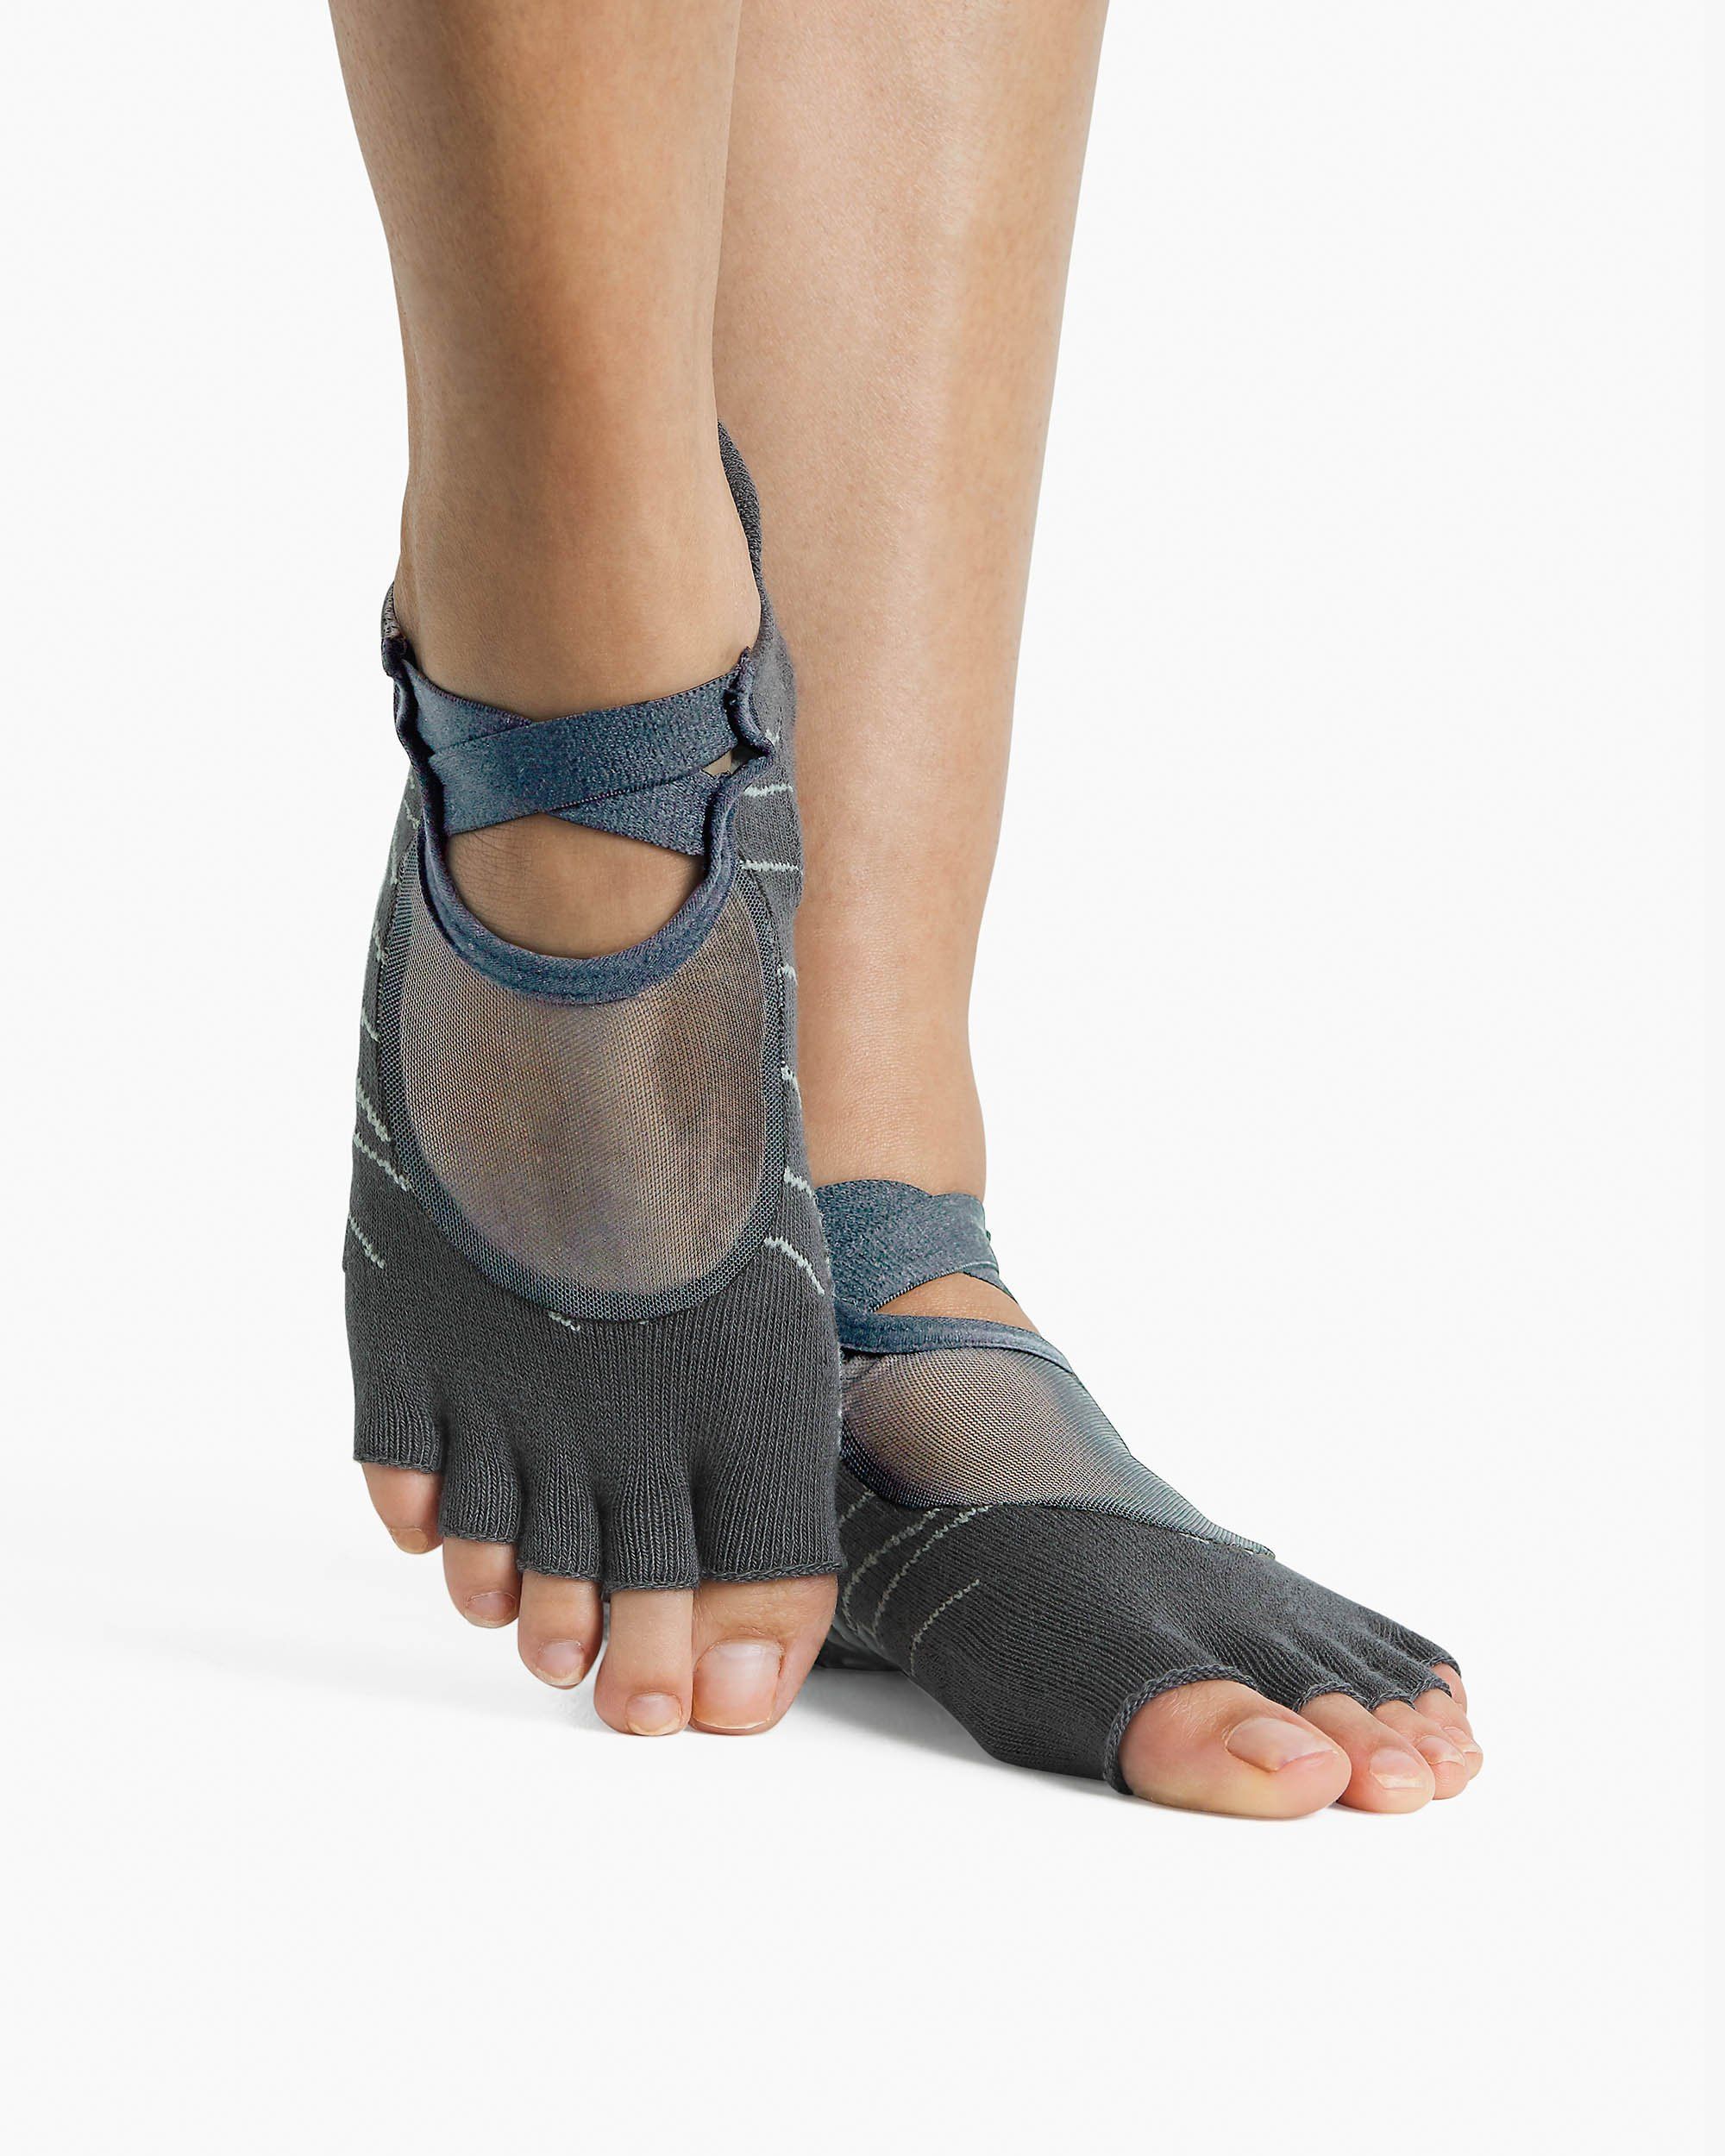 Dunes Toeless Grip Sock Our newest silhouette designed with you in mind. All over grip and power mesh for ventilation will power you through your hardest workout!